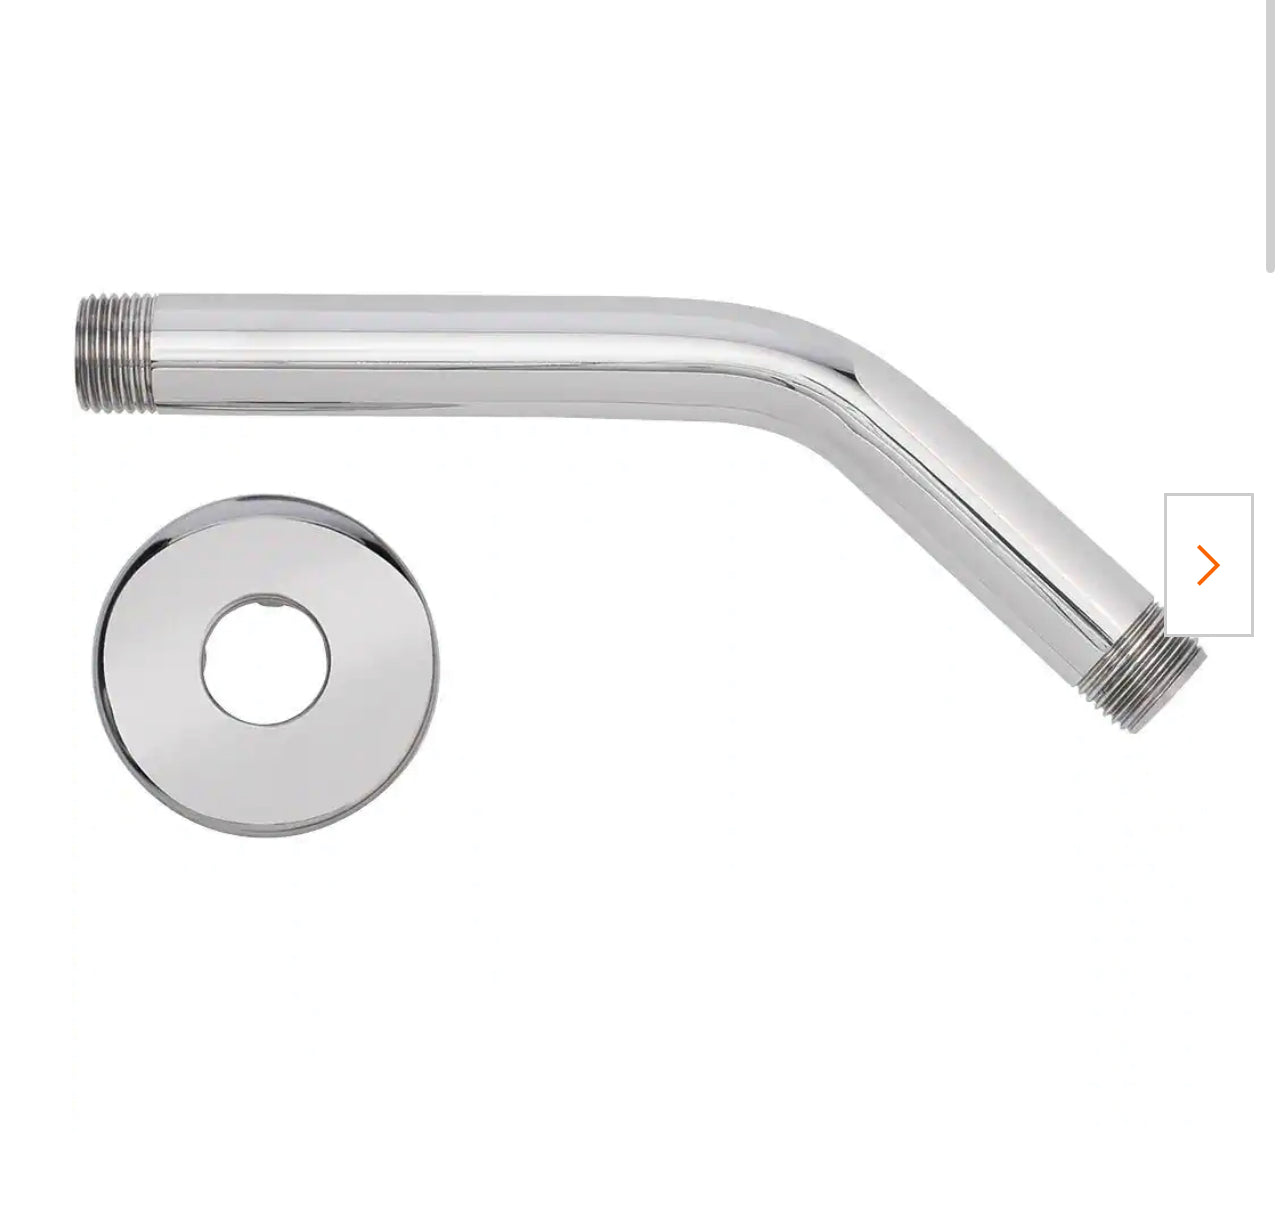 Glacier Bay 8 in. Shower Arm and Flange in Chrome Damaged Box